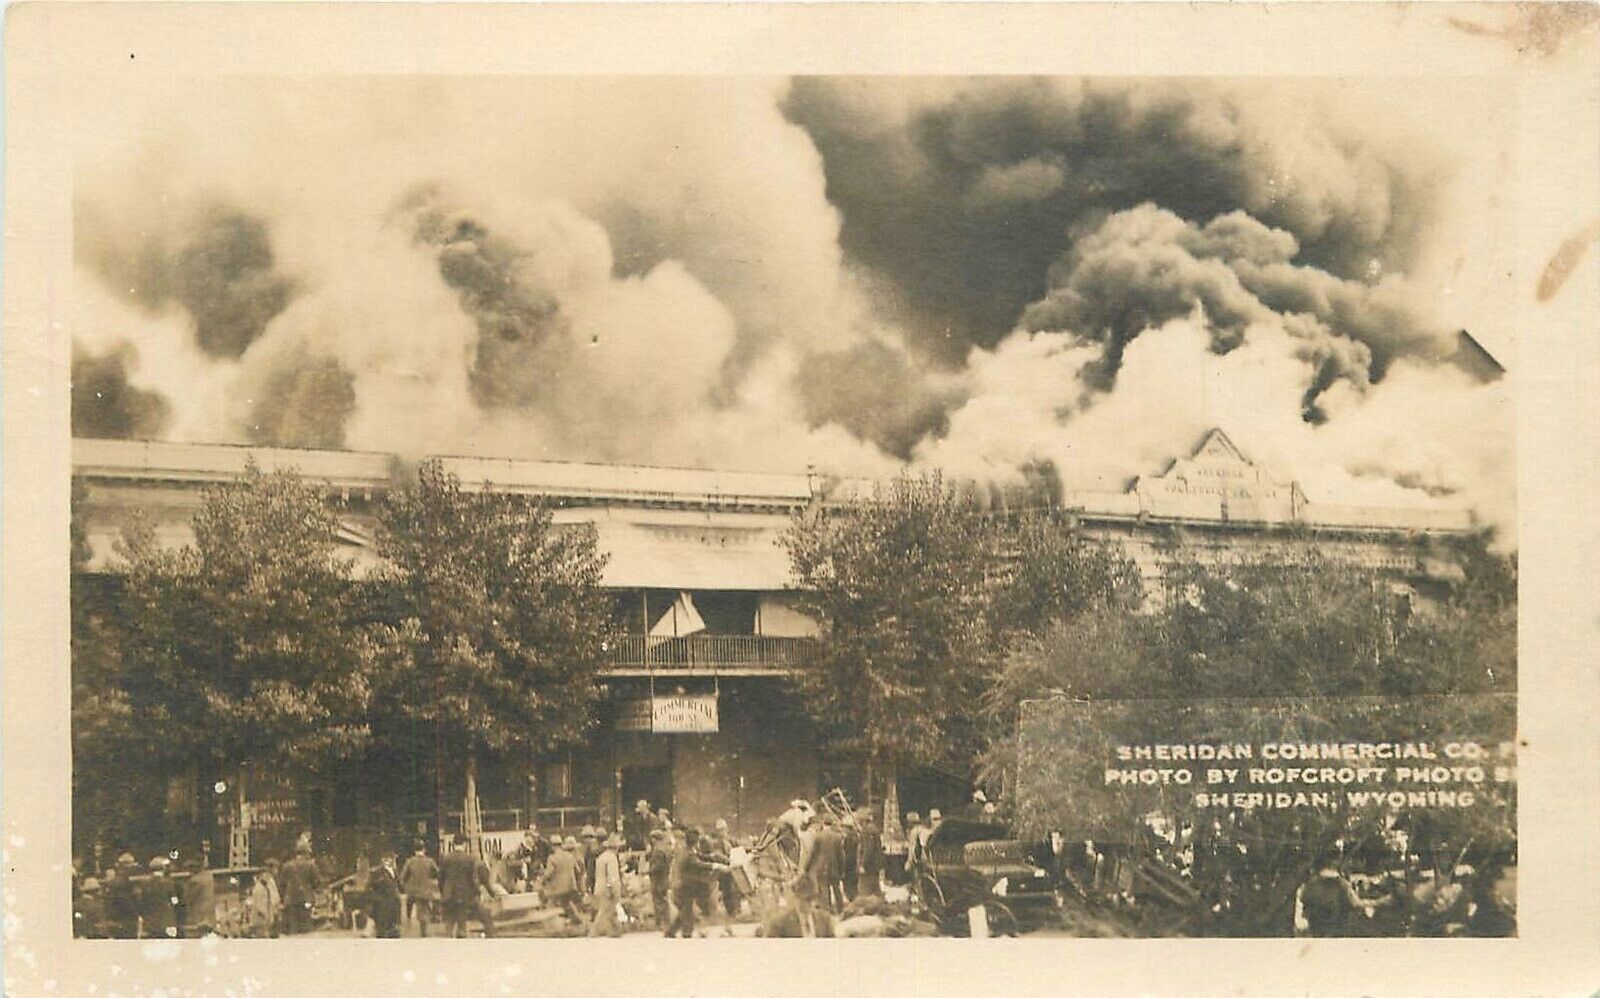 Postcard 1920s RPPC Wyoming Sheridan commercial company fire disaster 23-11965